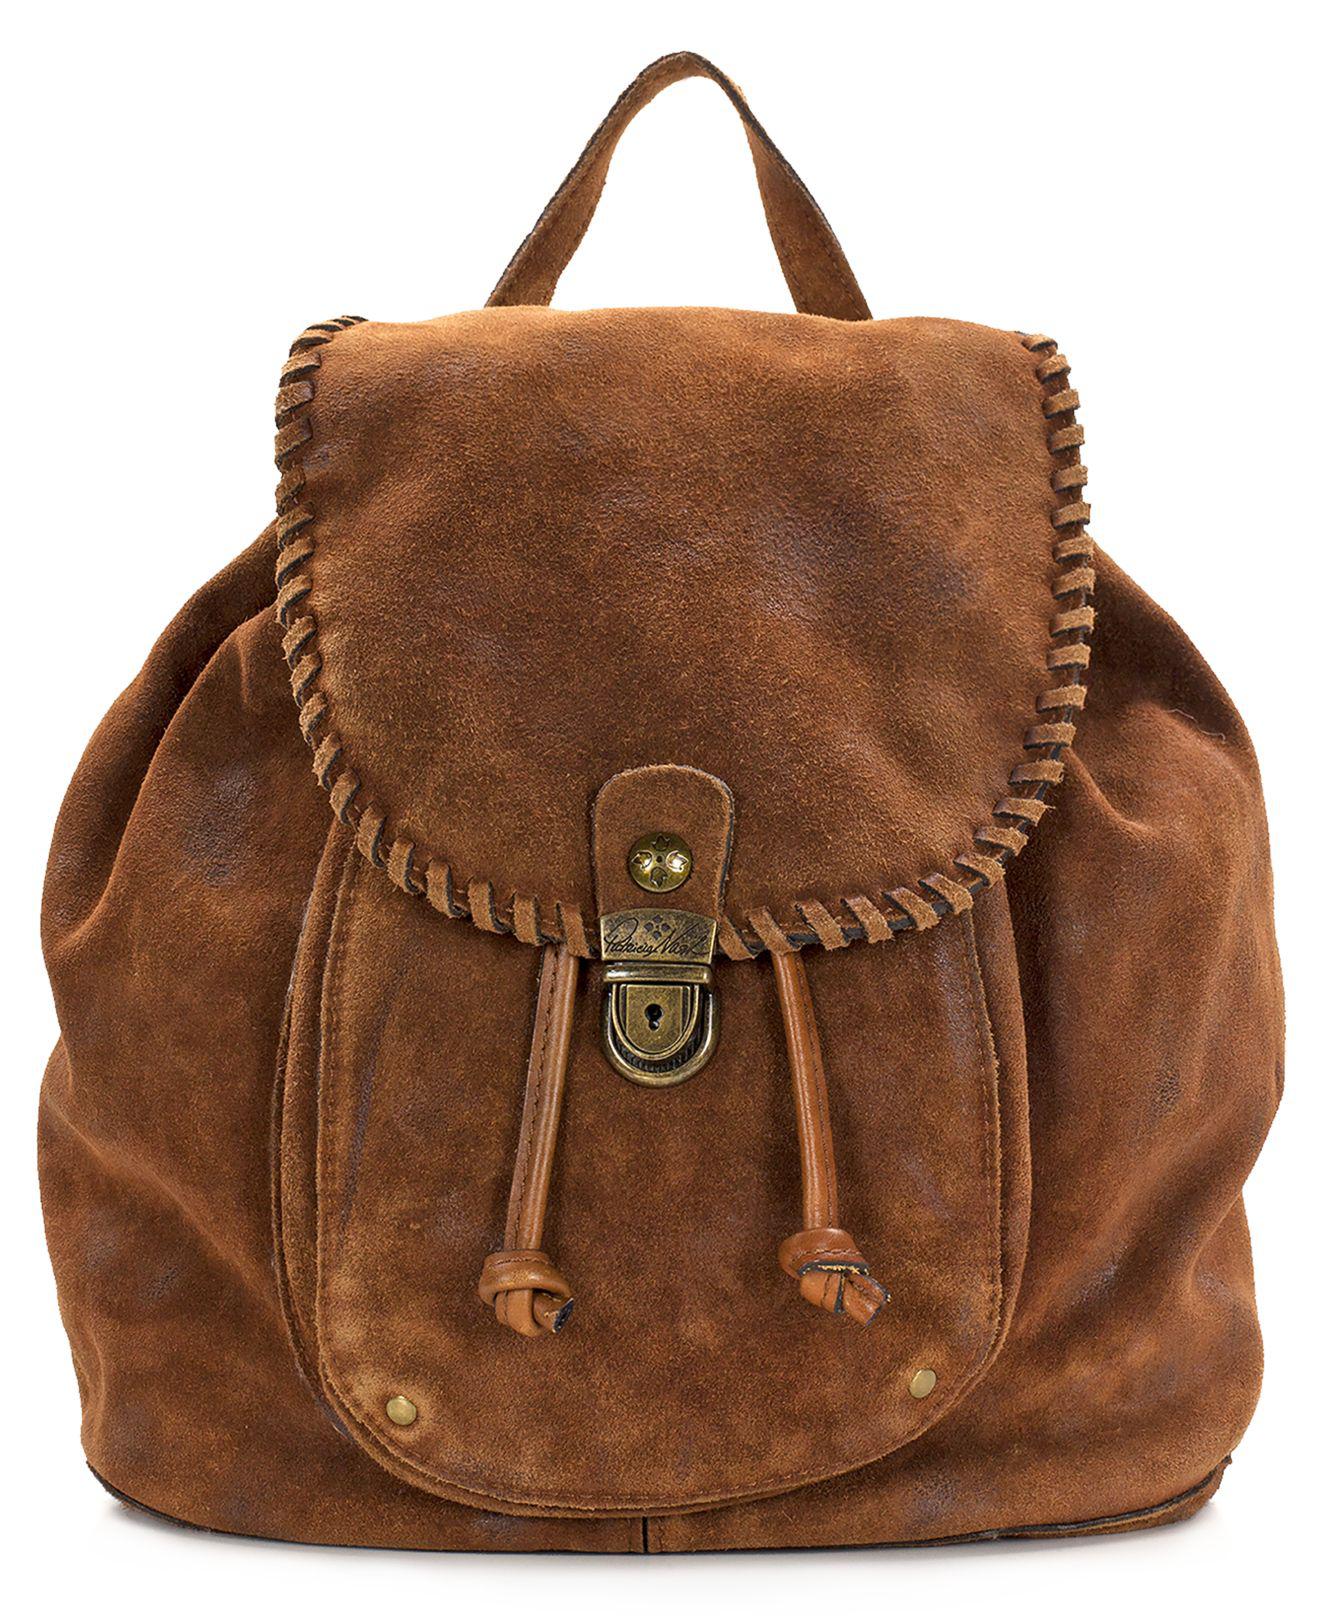 Patricia Nash Casape Burnished Leather Backpack in Brown - Lyst